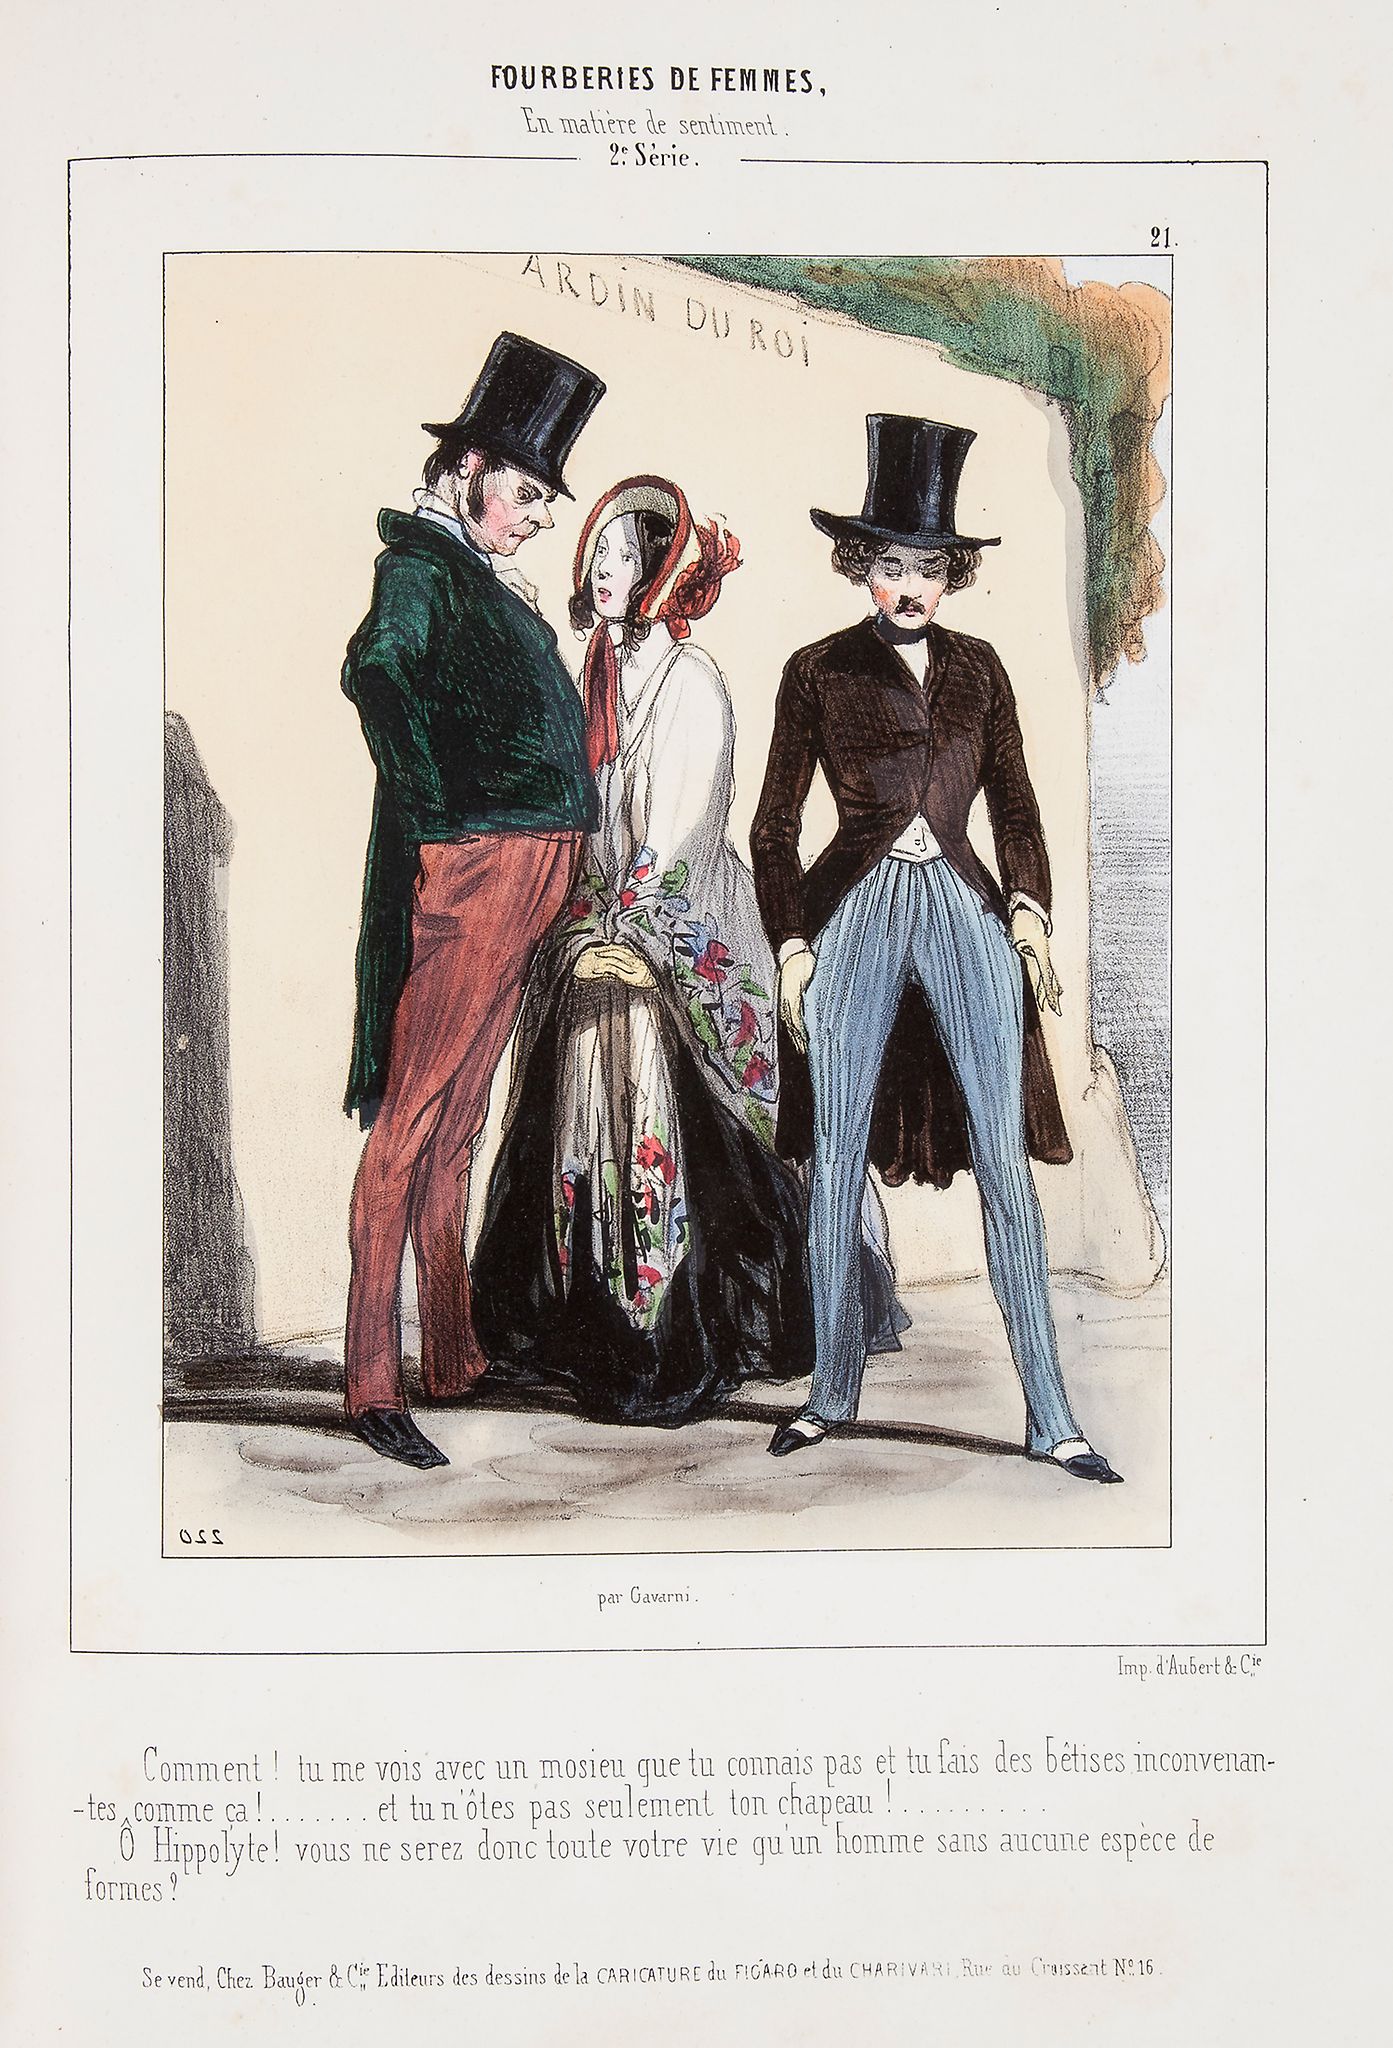 Gavarni (Paul) - Fourberies de Femmes,   the set of 12 hand-coloured lithographed plates, most - Image 2 of 2